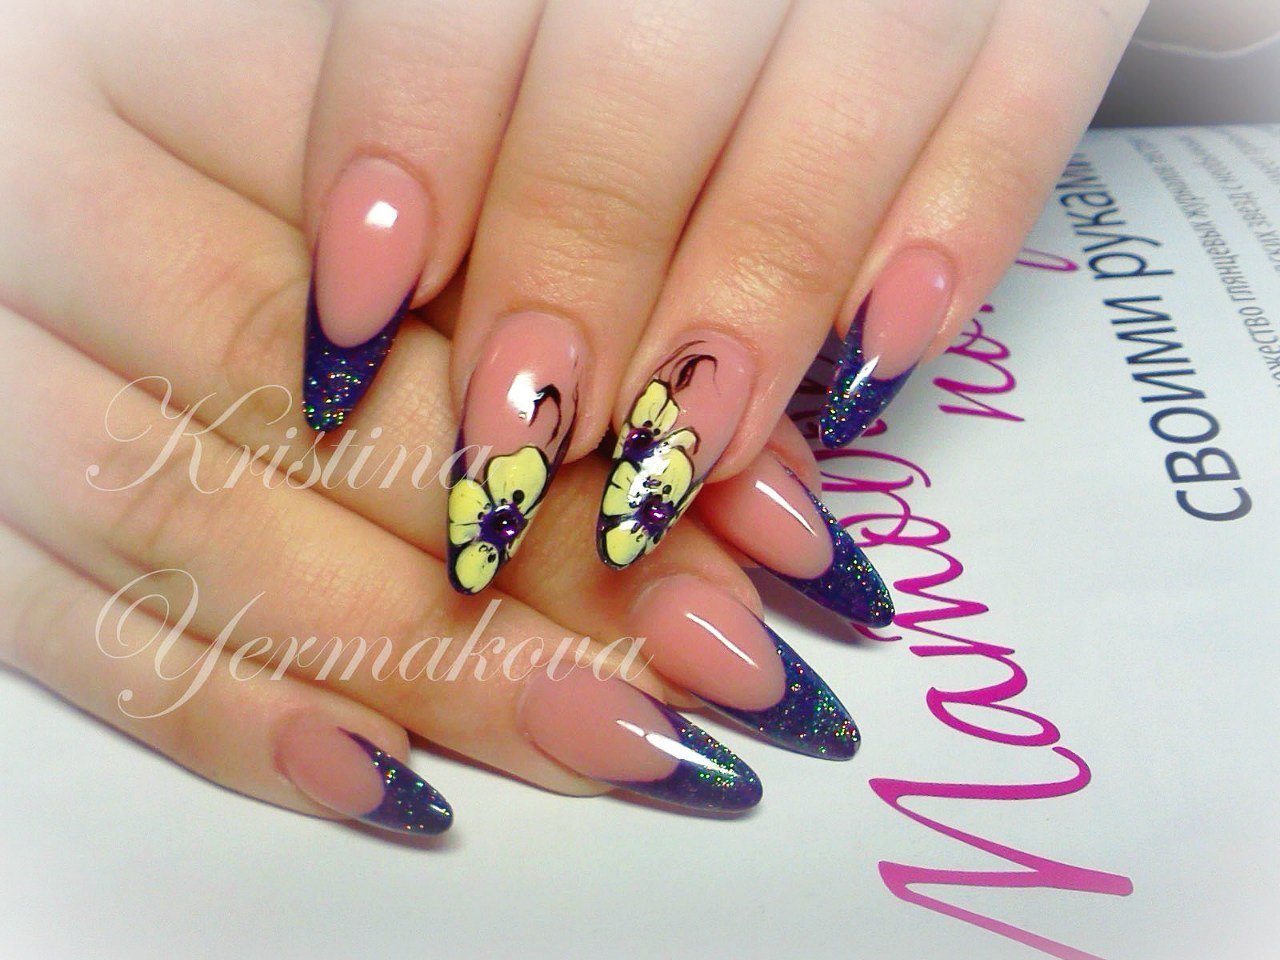 Nail Art Images - wide 9